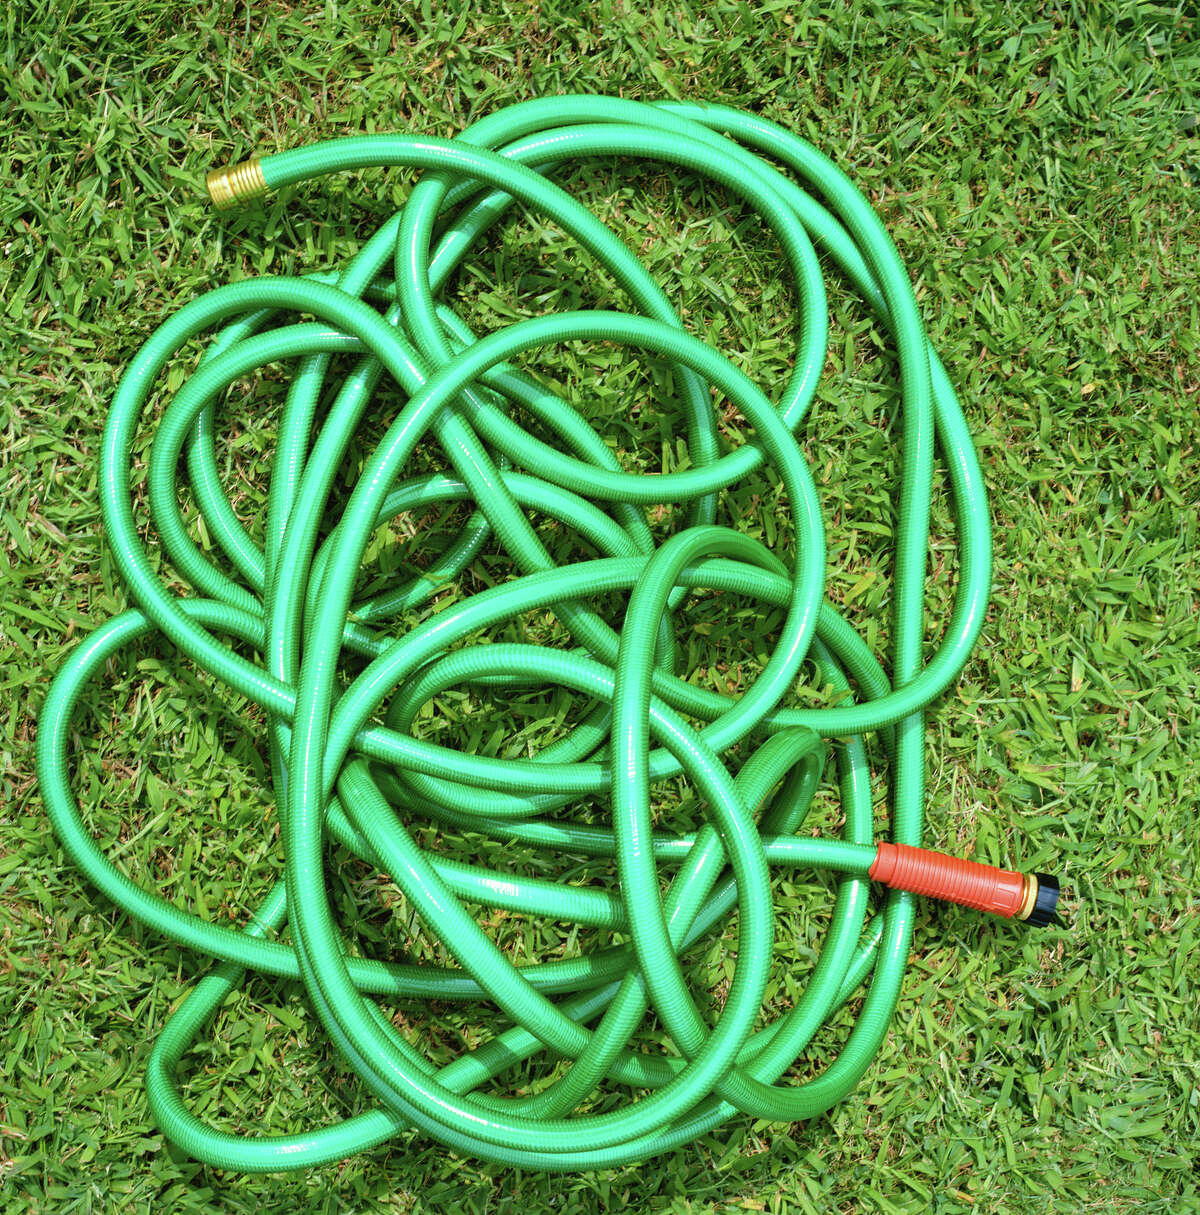 1. Remove all attached exterior hoses, drain and store them.